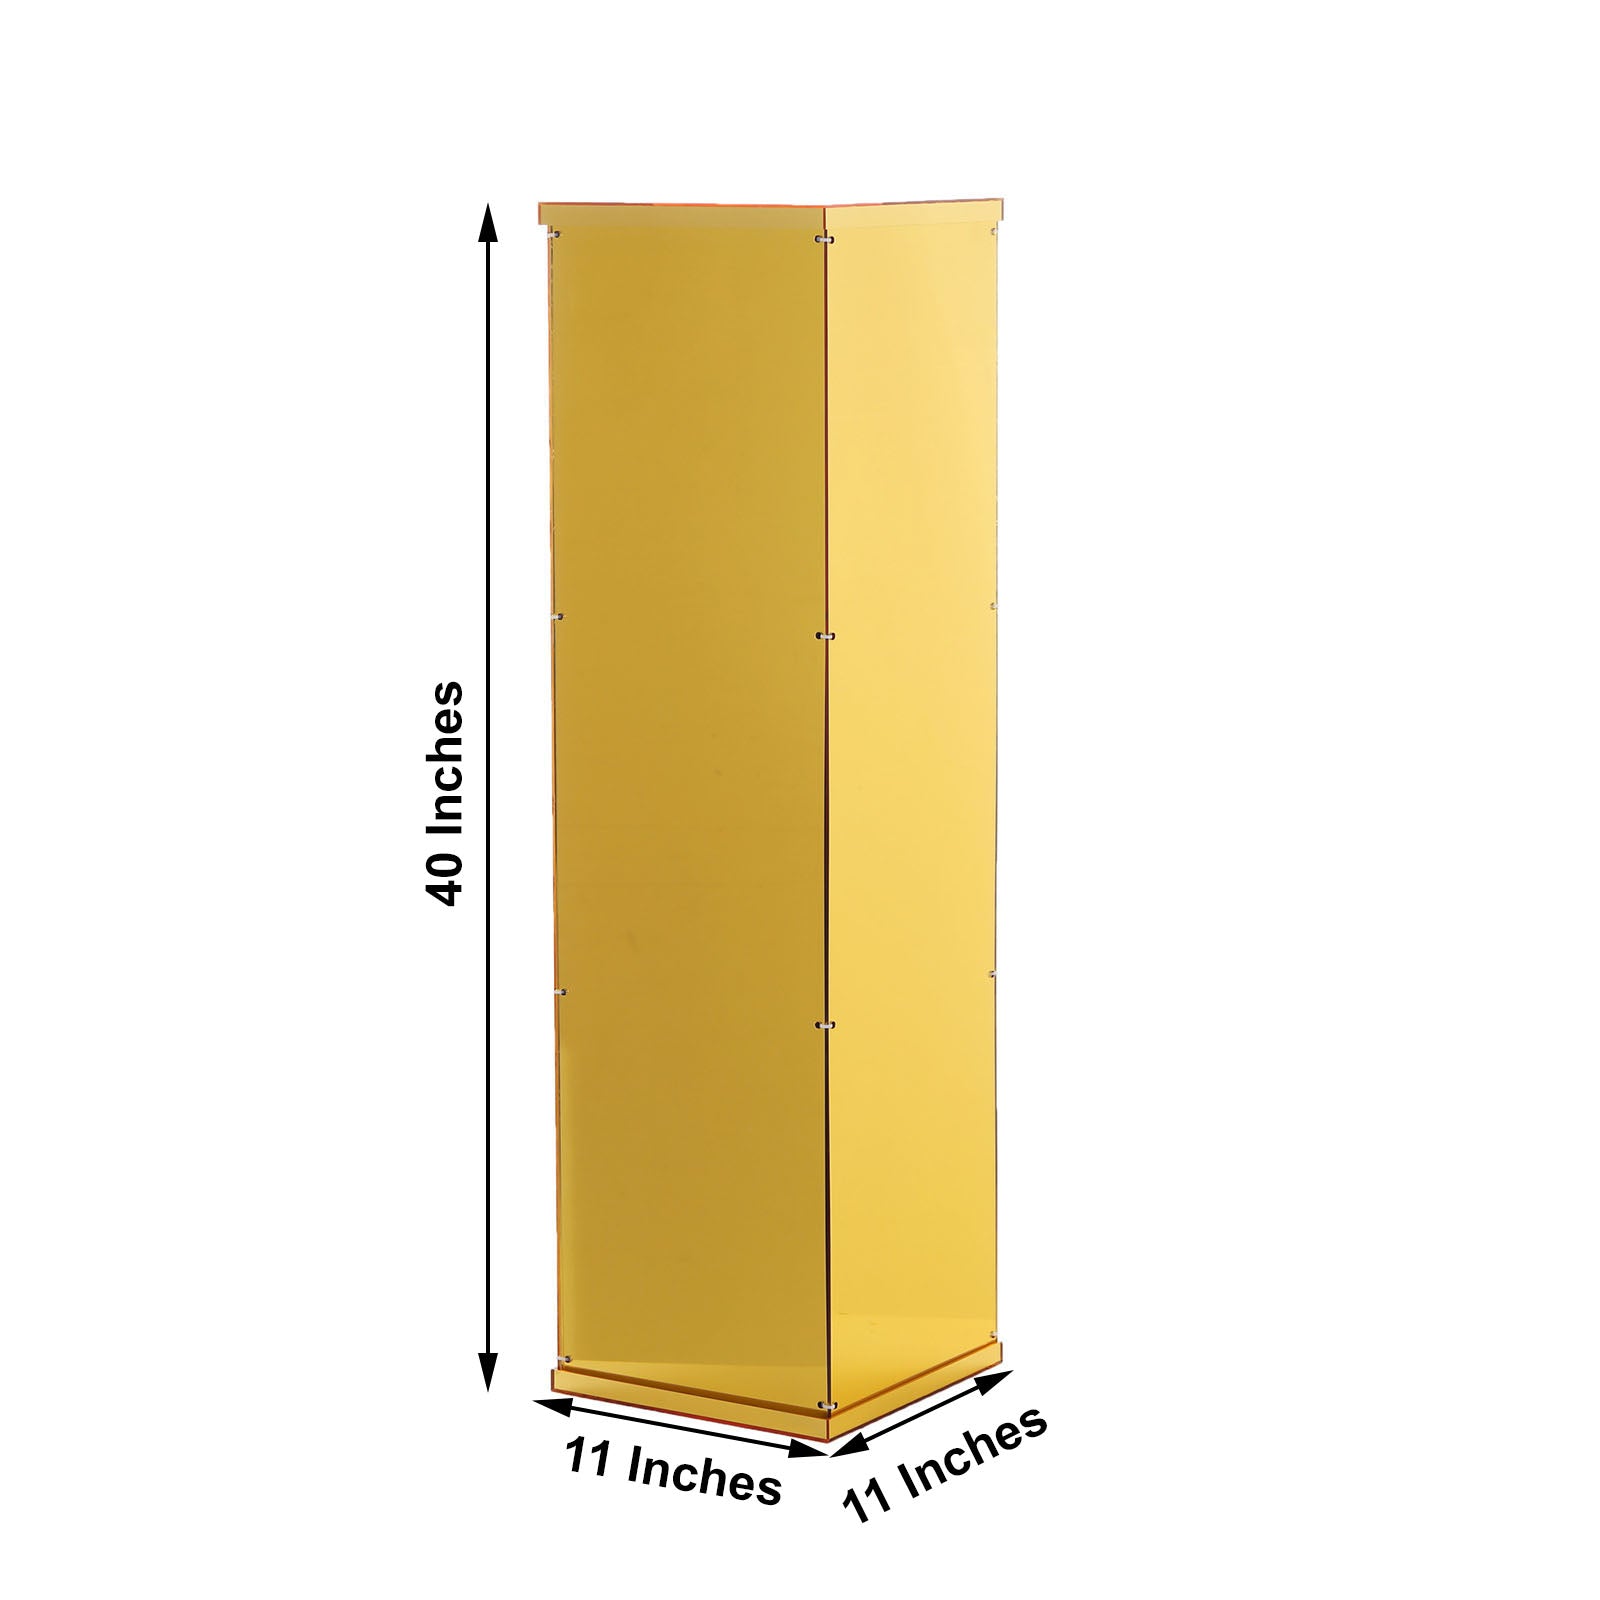 get-your-favorite-players-floor-standing-gold-mirror-finish-acrylic-pedestal-riser-display-box-with-interchangeable-lid-and-base-40-on-sale_2.jpg